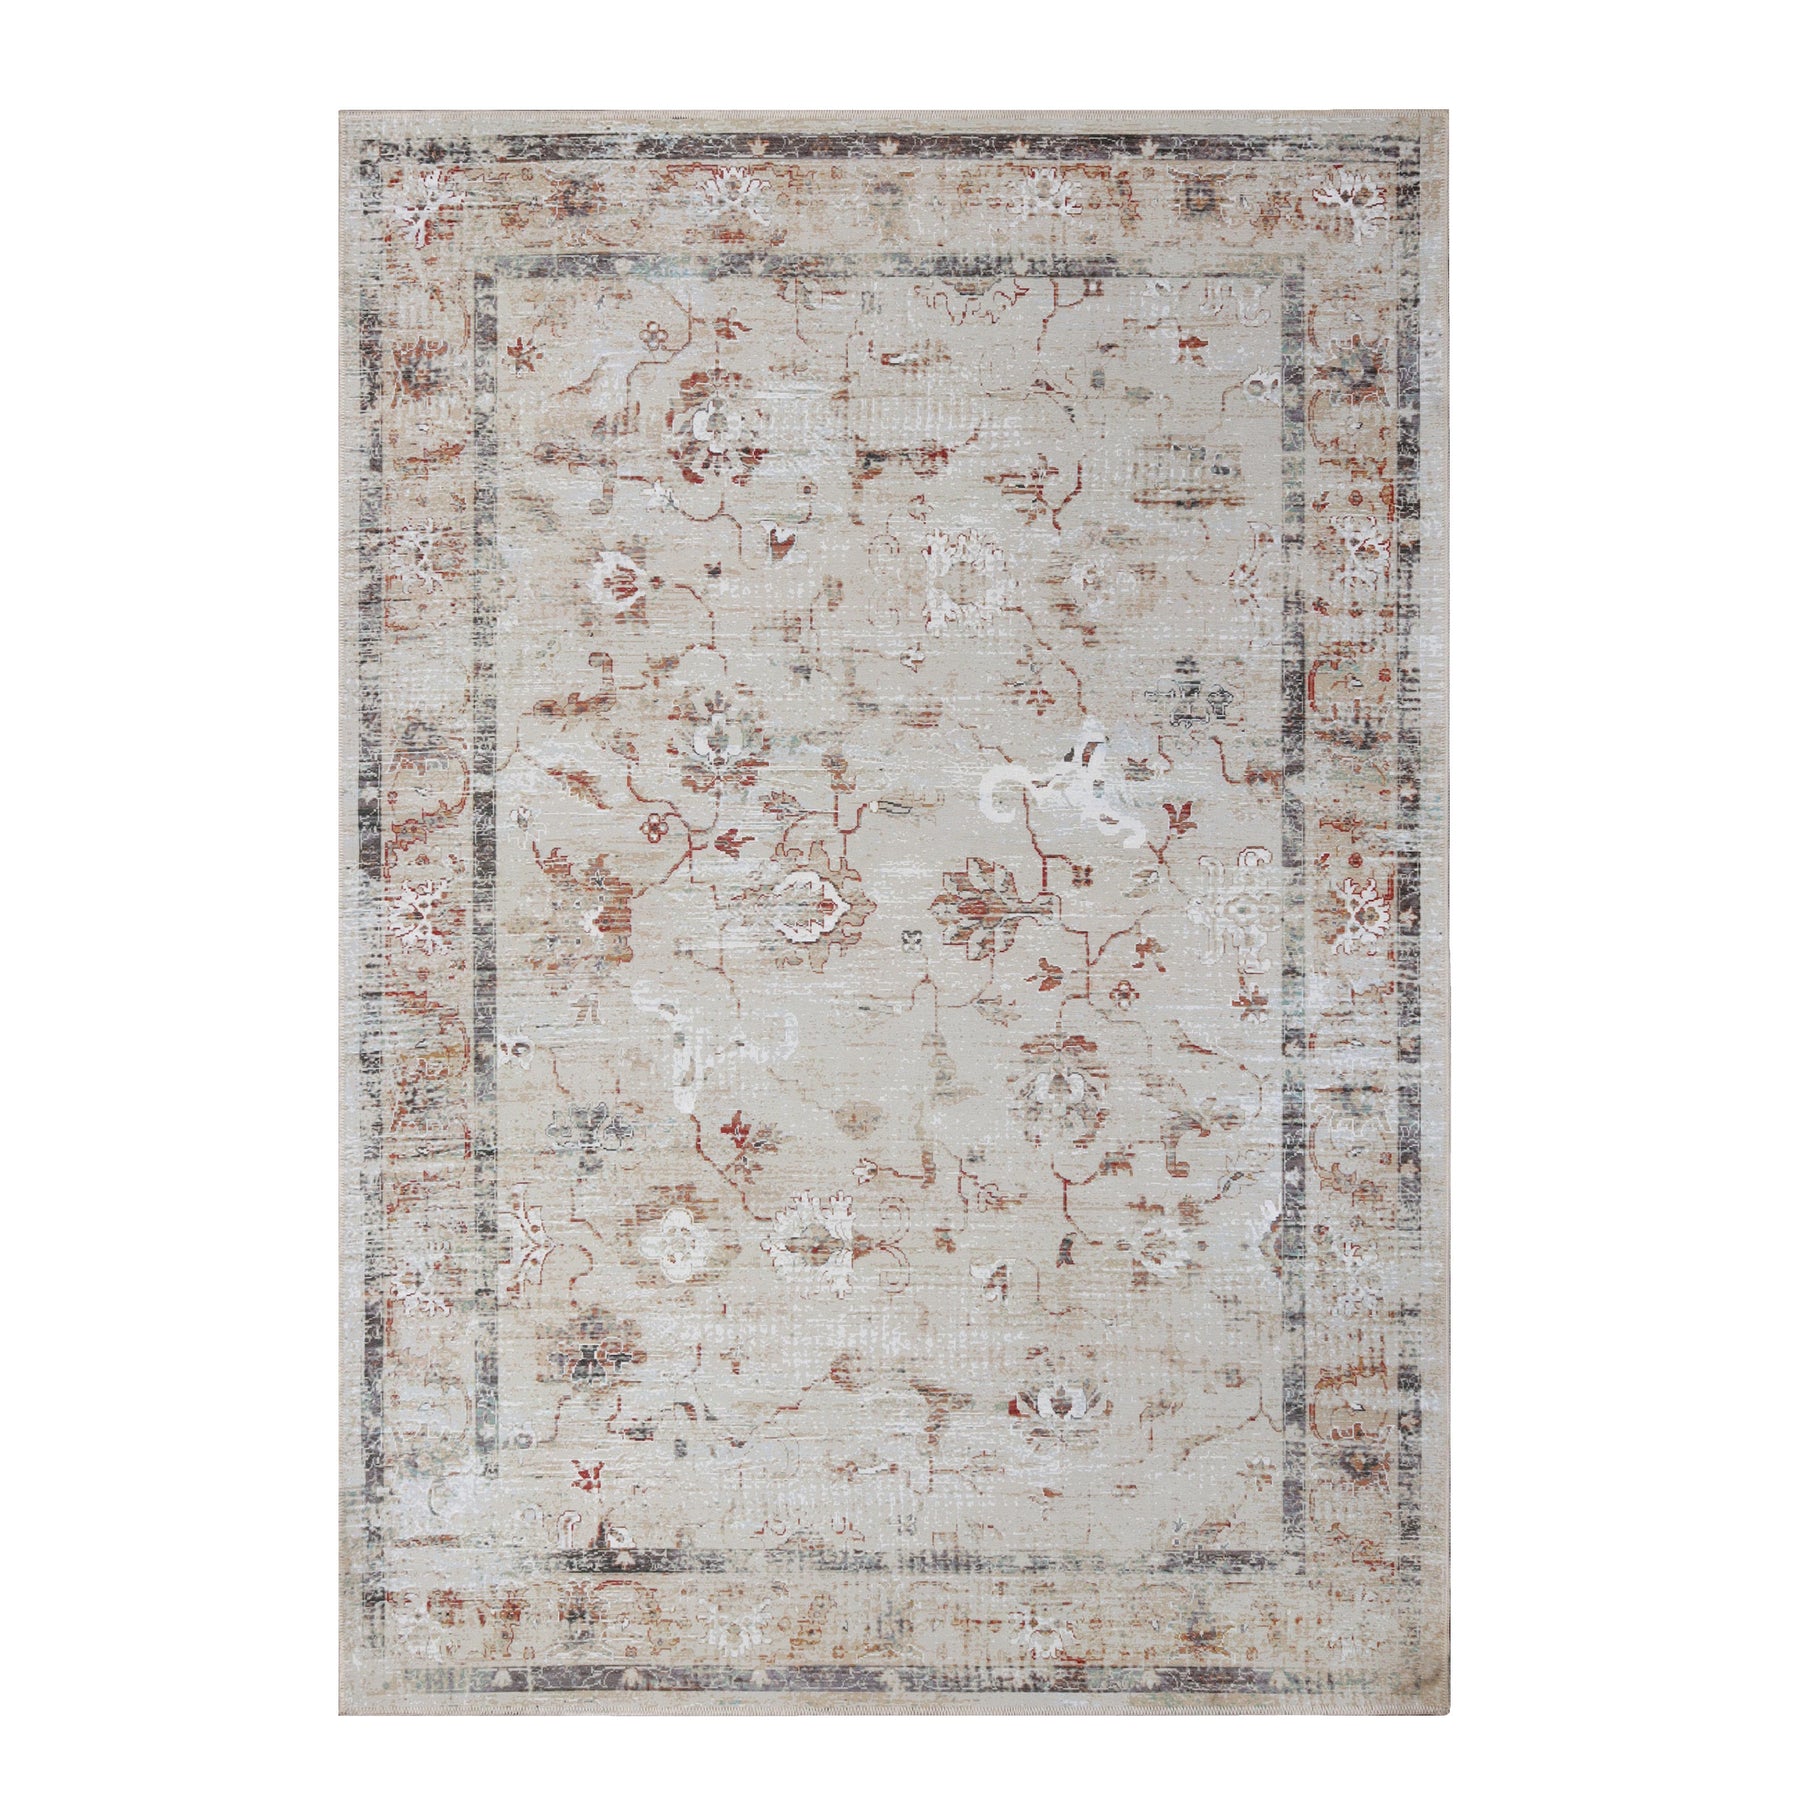 Swan Floral Scroll Non-Slip Machine Washable Indoor Area Rug or Runner